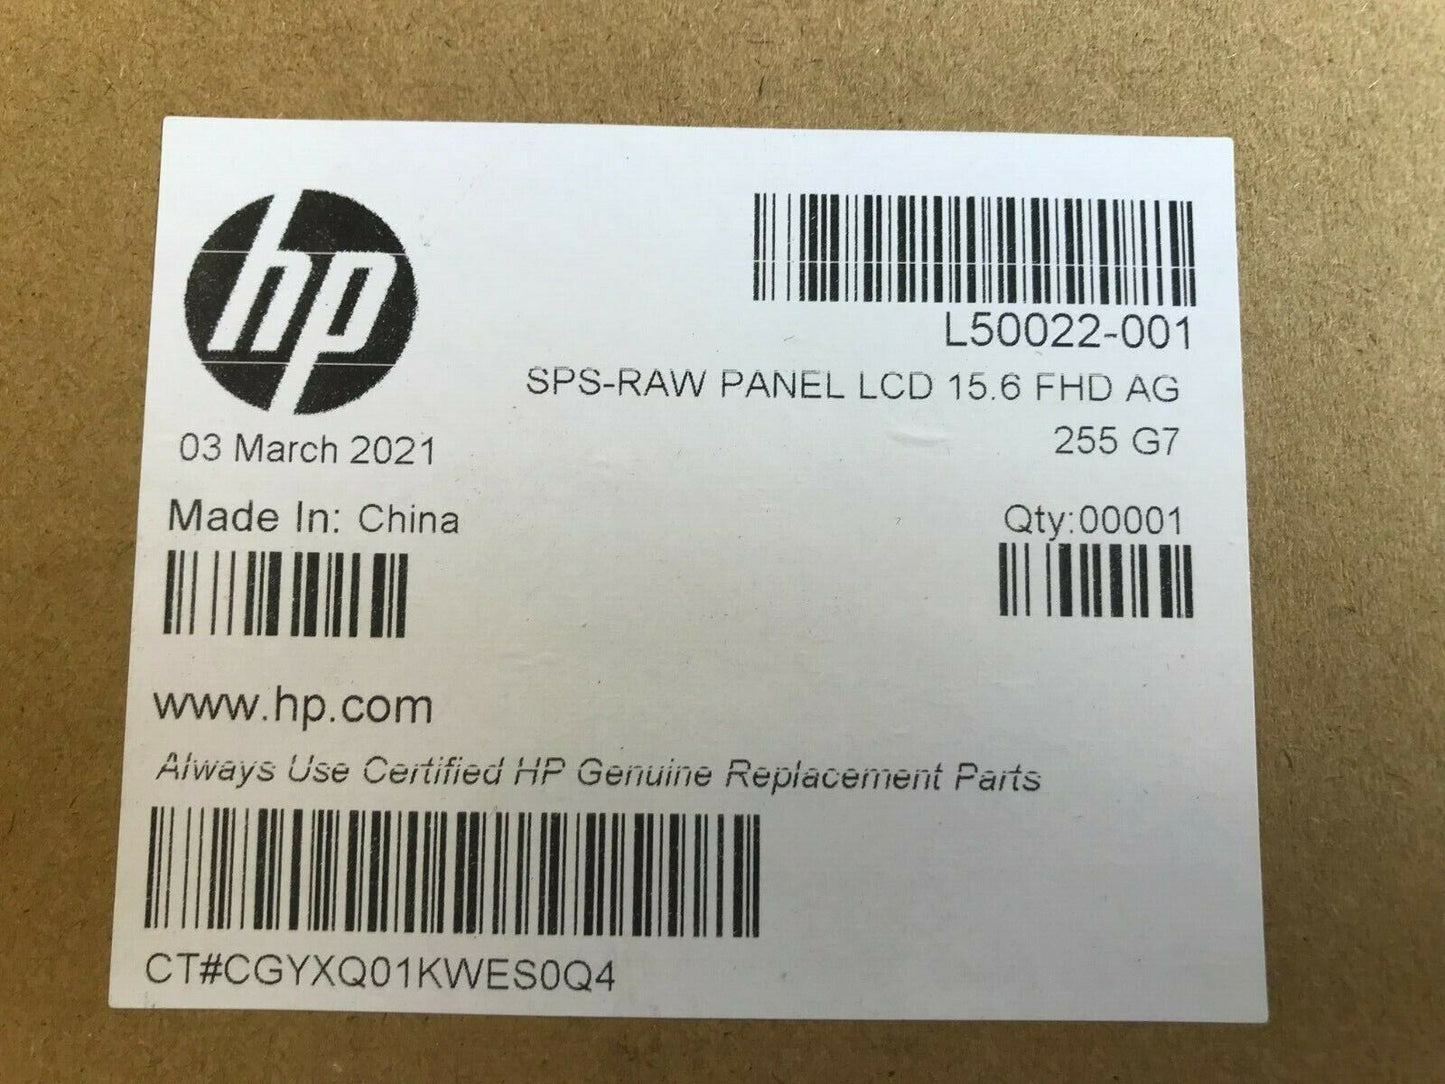 GENUINE NEW HP L50022-001 RAW PANEL LCD DISPLAY 15.6 FHD AG 255 G7